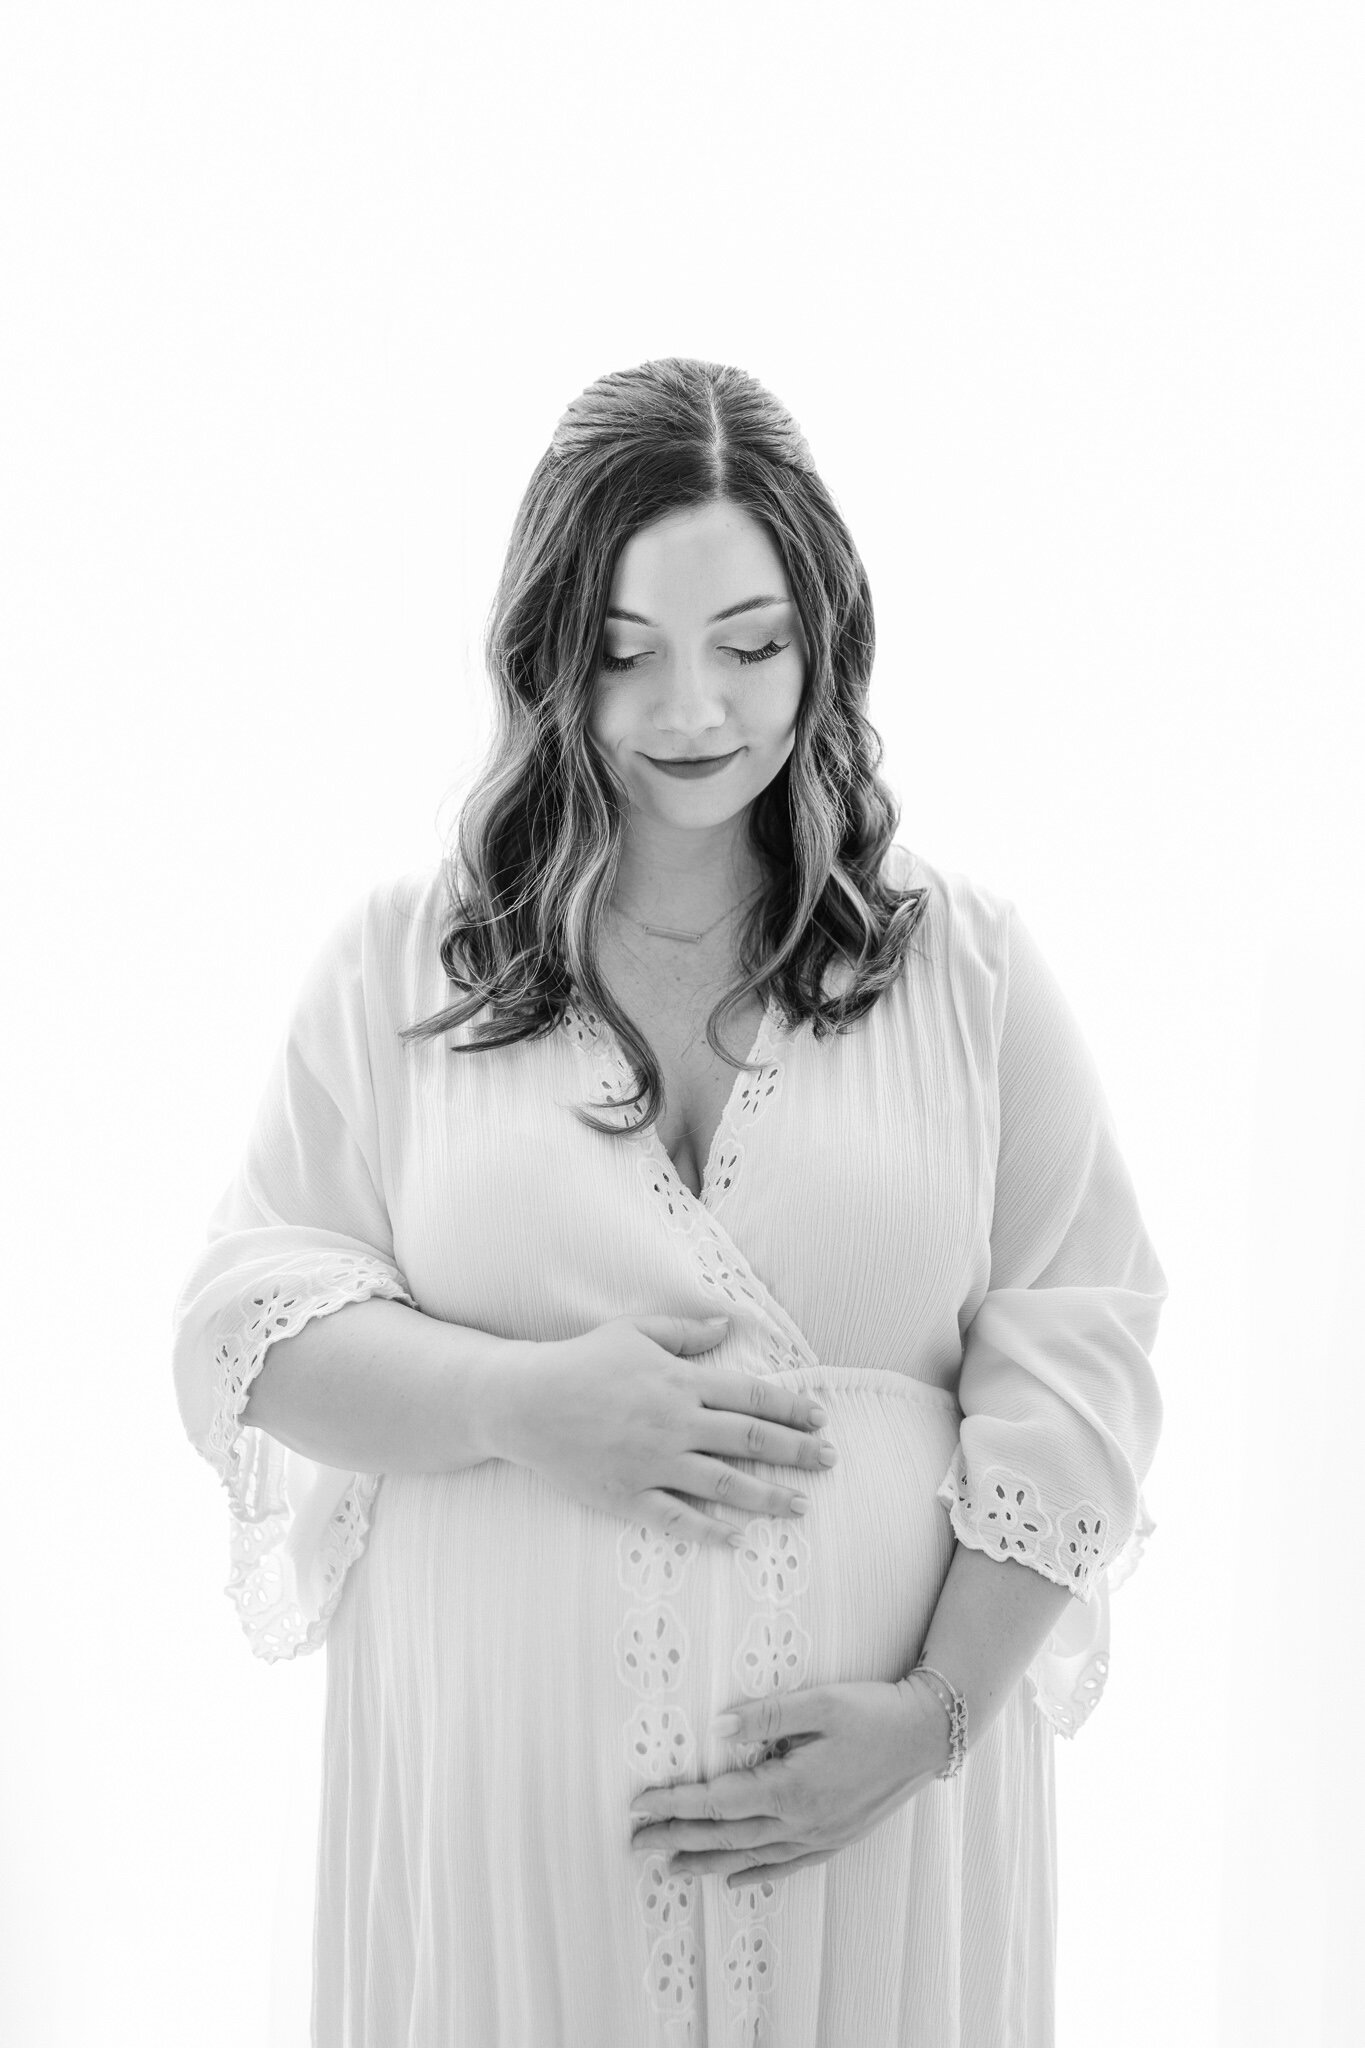 Sweet note from a client:

&ldquo;Nicole did my maternity shoot in March and our newborn shoot in May, and I can&rsquo;t say enough good things about her. She is the sweetest person to work with and puts you completely at ease during her photo shoots